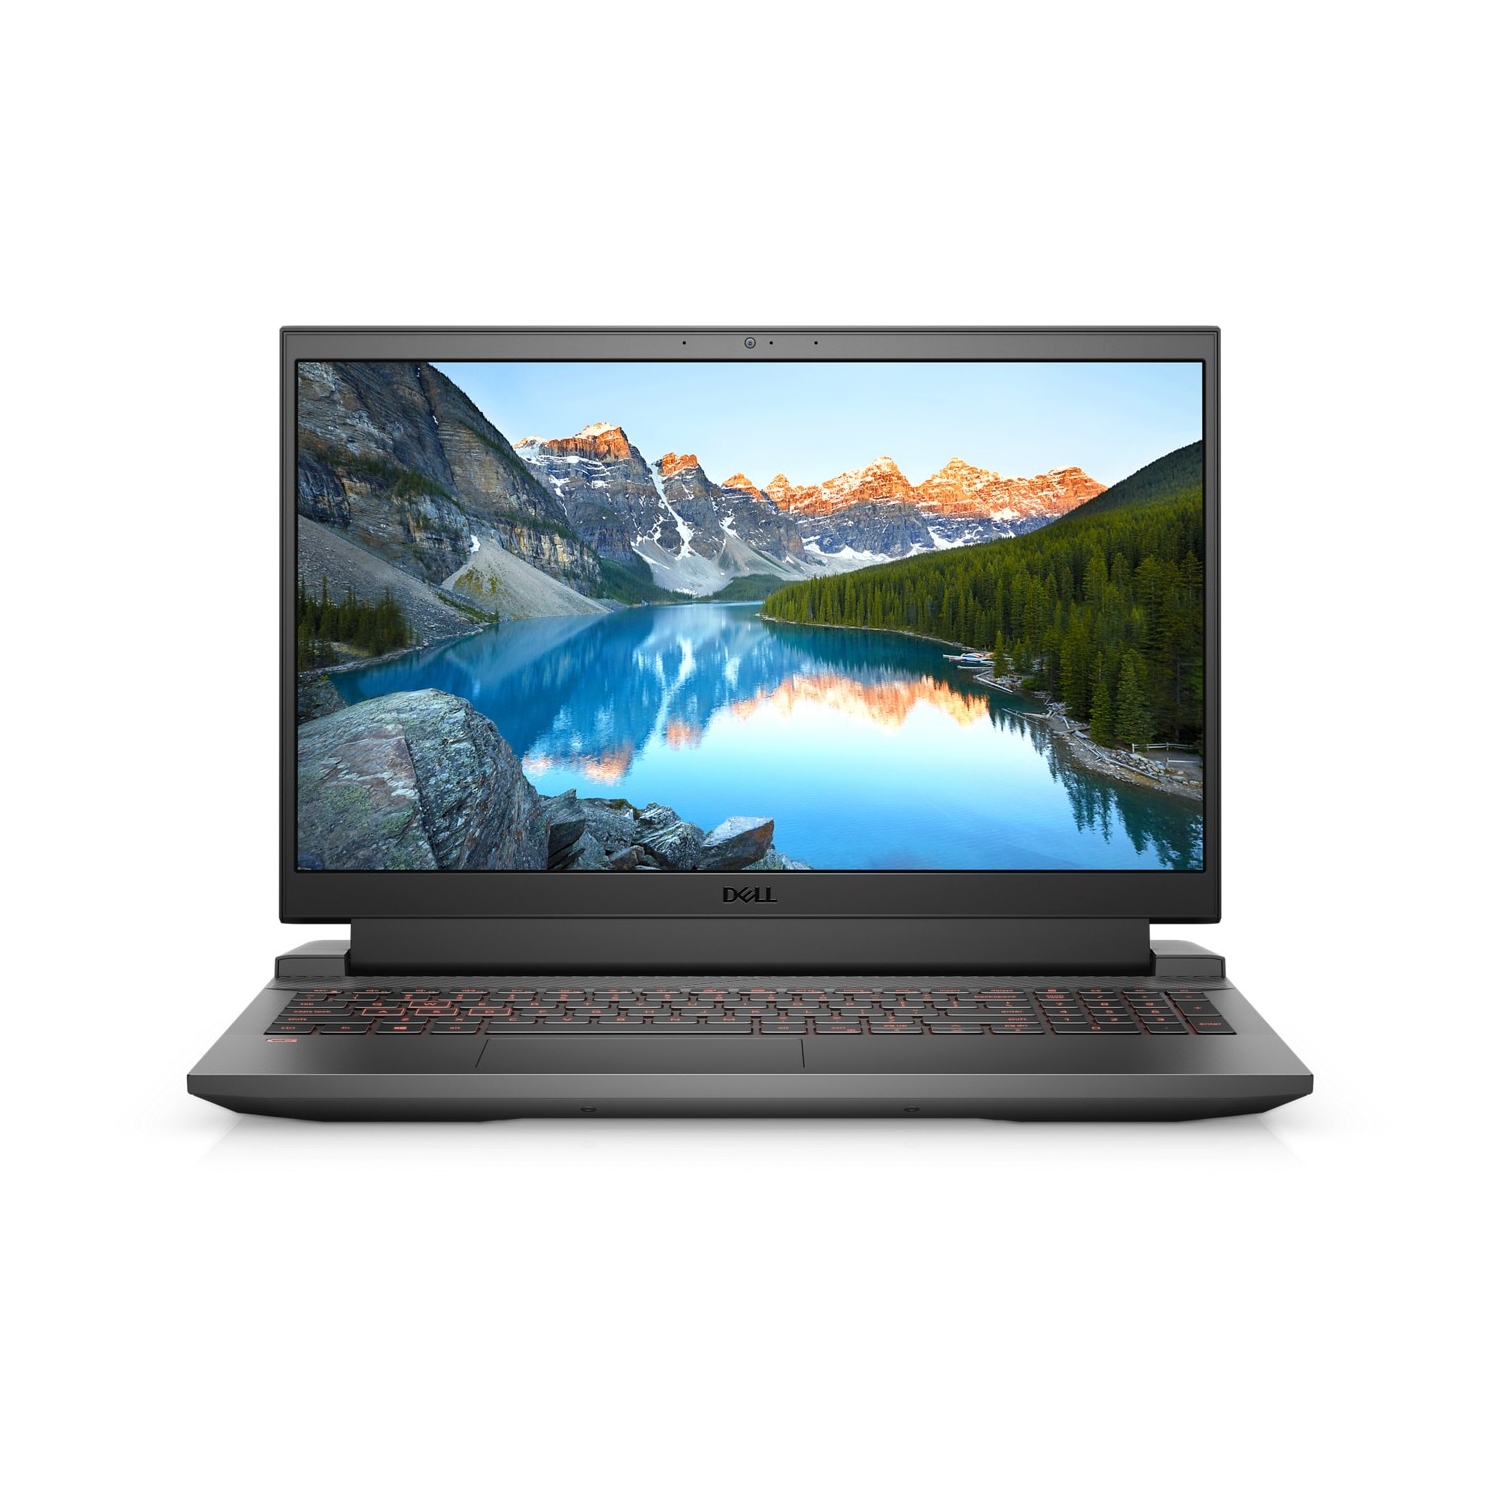 Refurbished (Excellent) – Dell G5 5510 Gaming Laptop (2021) | 15.6" FHD | Core i5 - 512GB SSD - 8GB RAM - 1650 Ti | 4 Cores @ 4.1 GHz - 10th Gen CPU